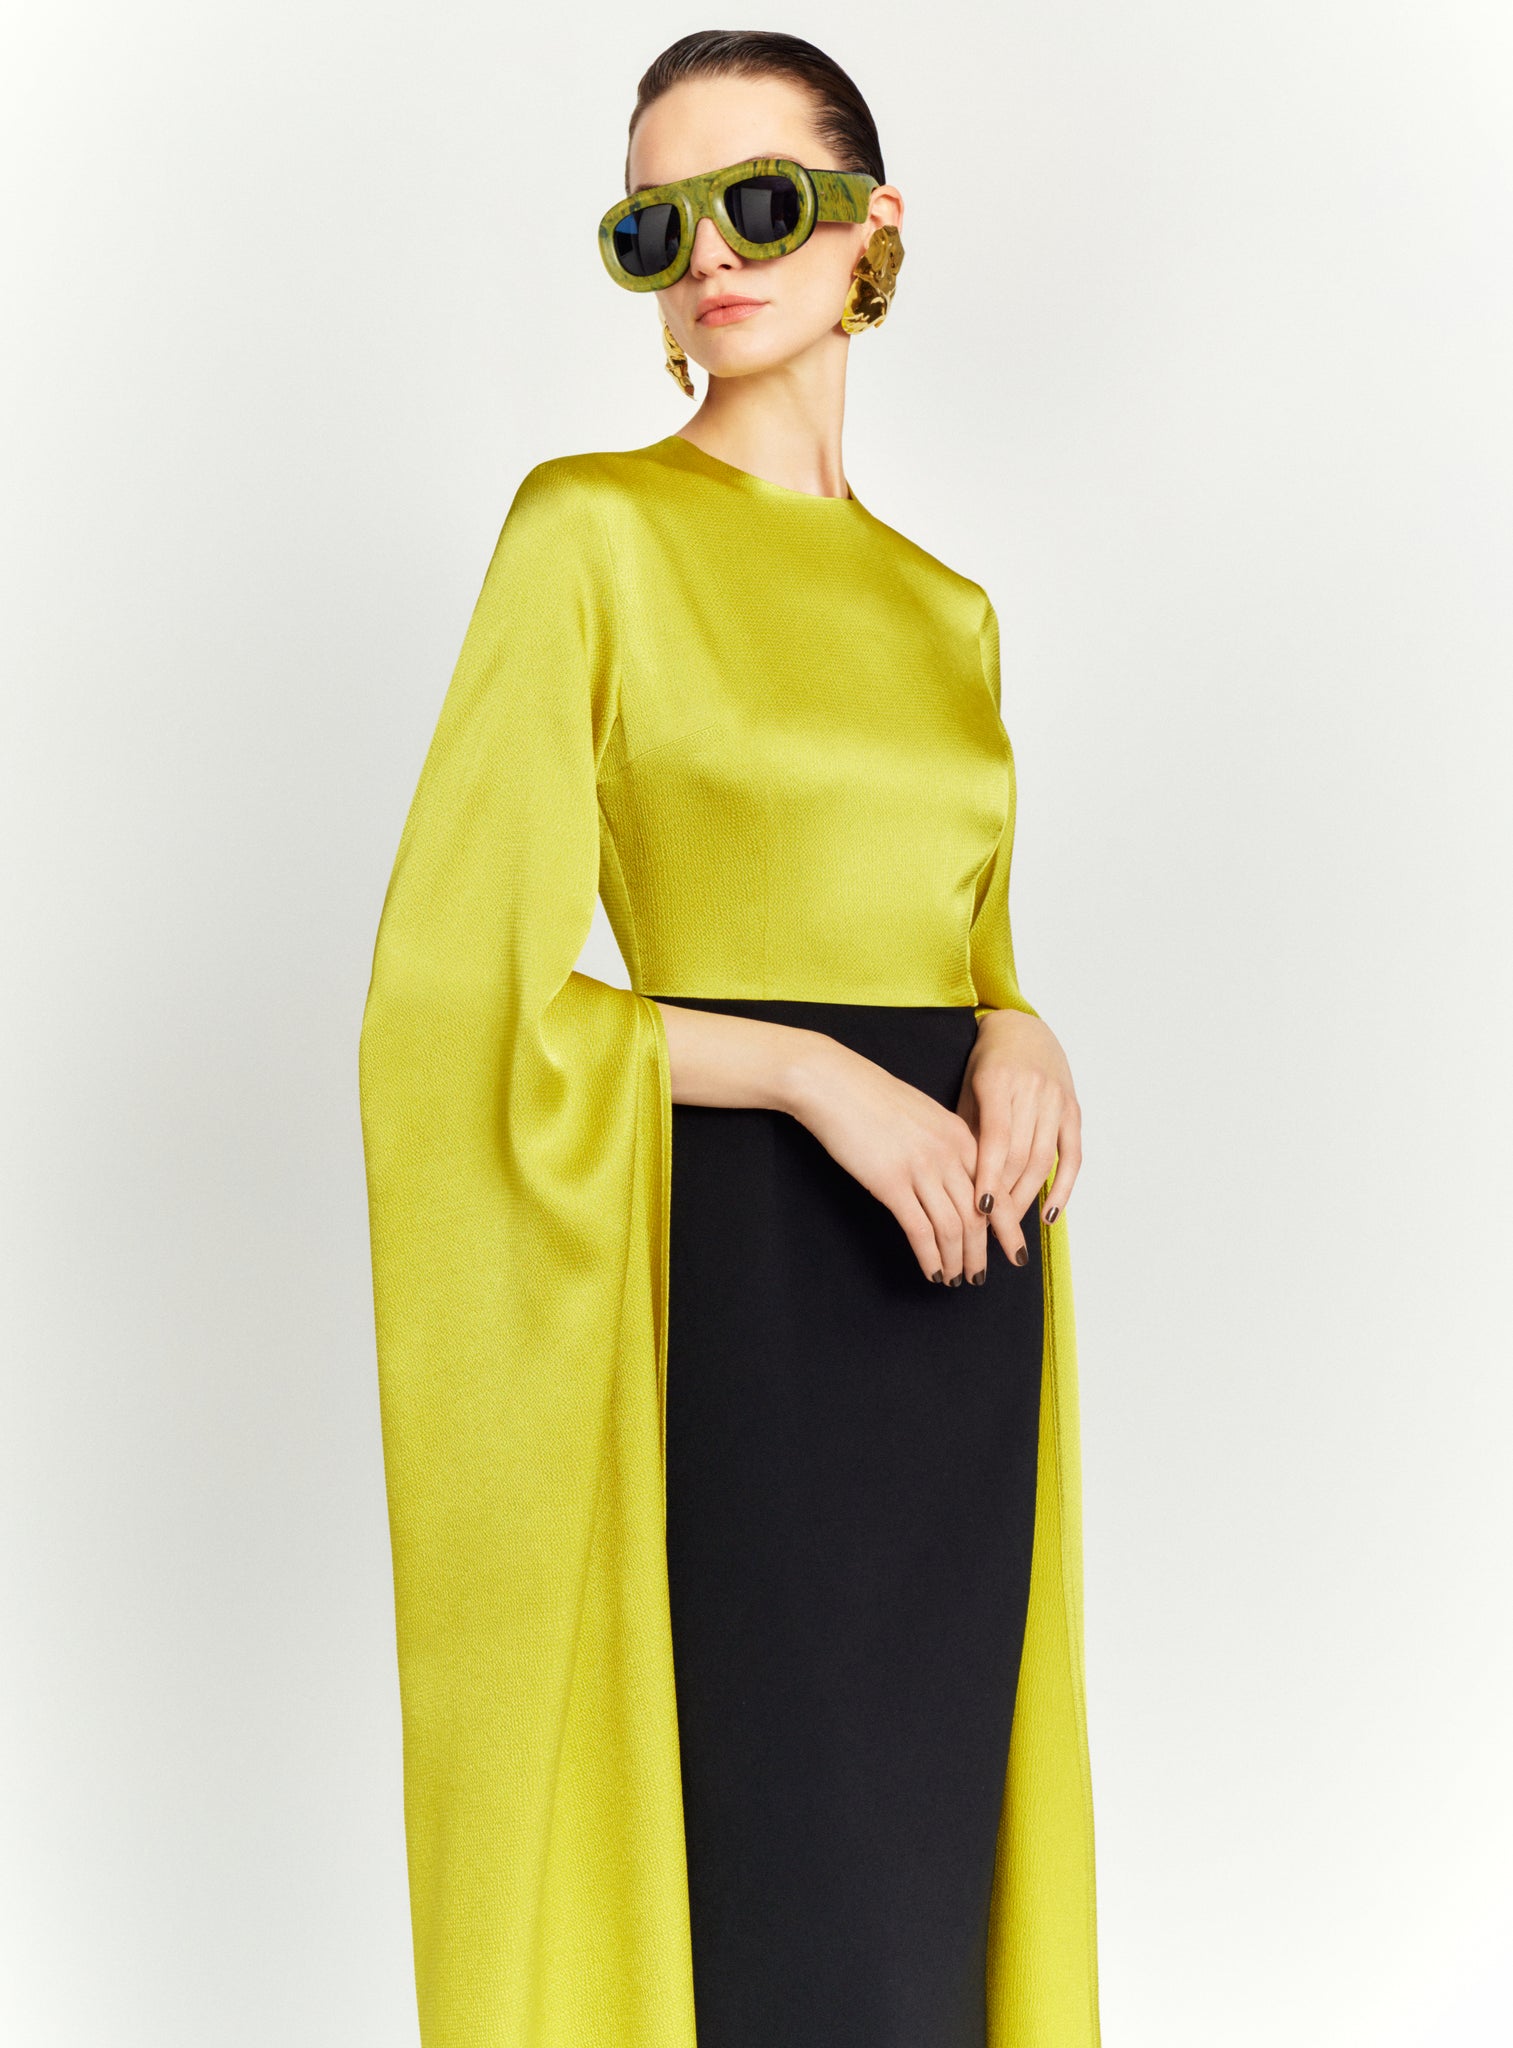 The Adley Maxi Dress in Chartreuse and Black